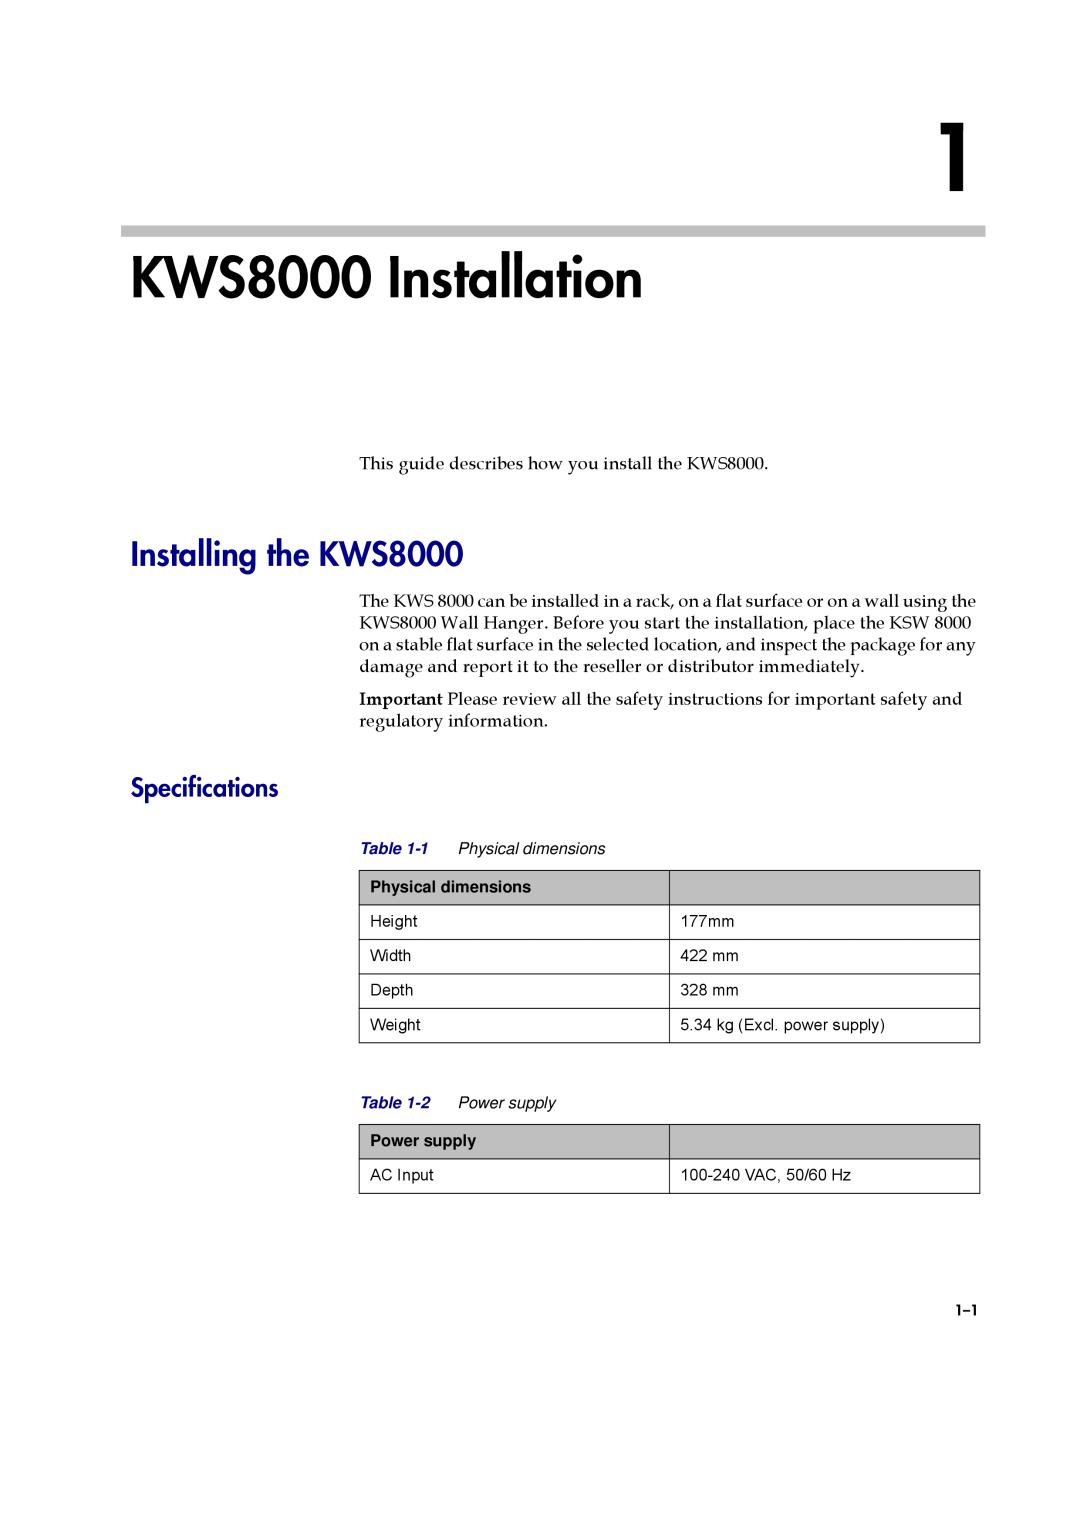 Polycom manual KWS8000 Installation, Installing the KWS8000, Specifications 